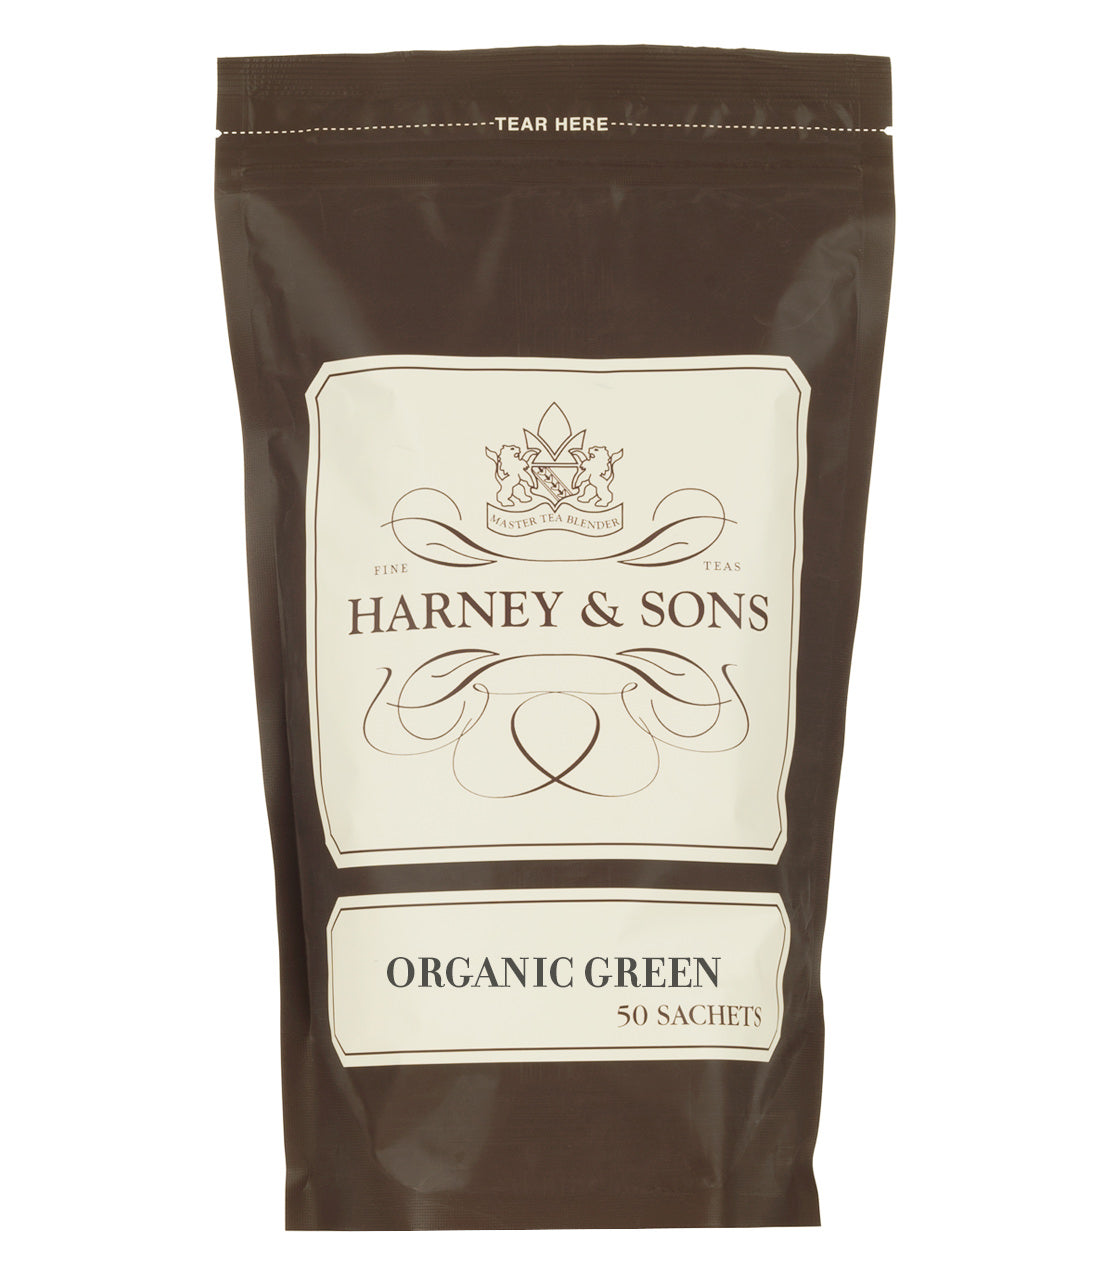 Organic Green with Citrus & Ginkgo, Bag of 50 Sachets - Sachets Bag of 50 Sachets - Harney & Sons Fine Teas